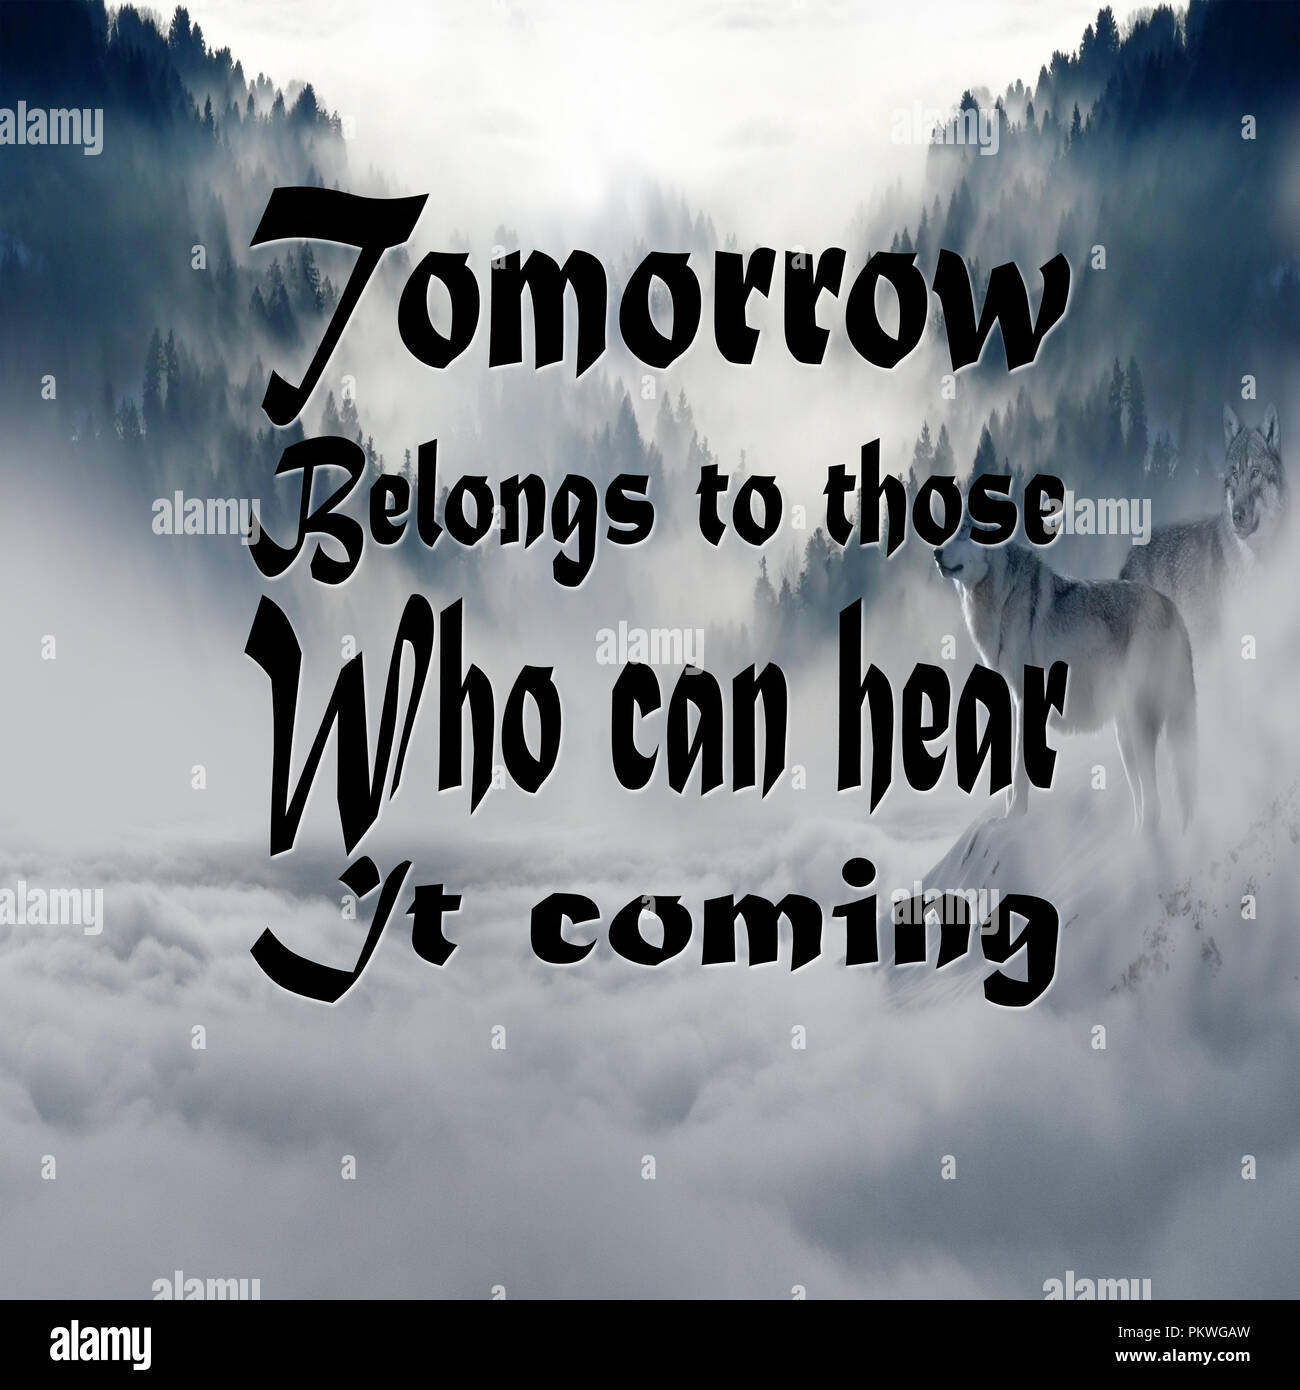 Inspirational Quotes Tomorrow belongs to those who can hear it coming, positive, motivational Stock Photo